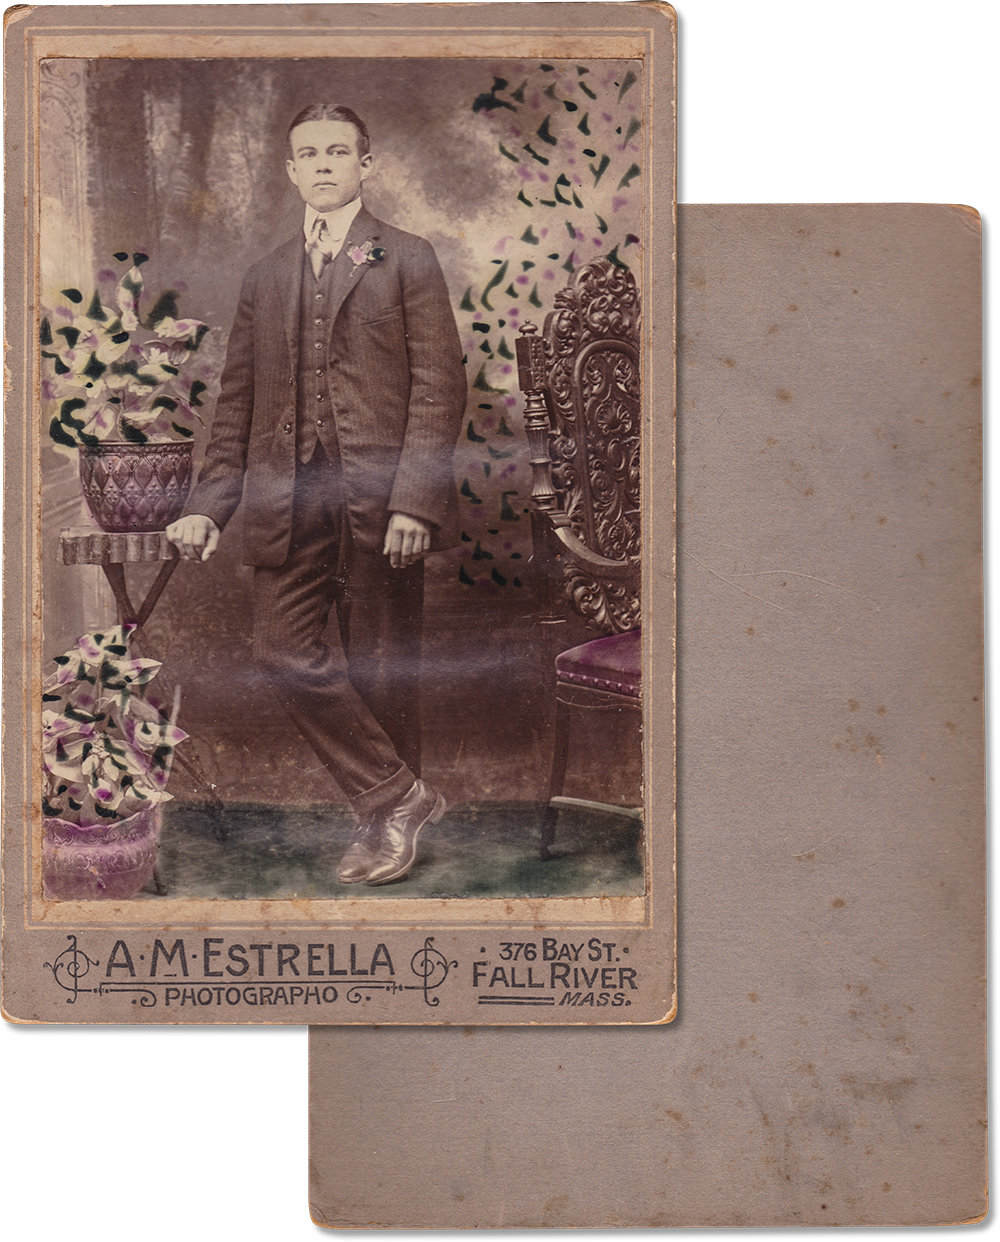 Antique Portrait of Young Man with Color by A.M. Estrella, Fall River, Massachusetts - Rad Future